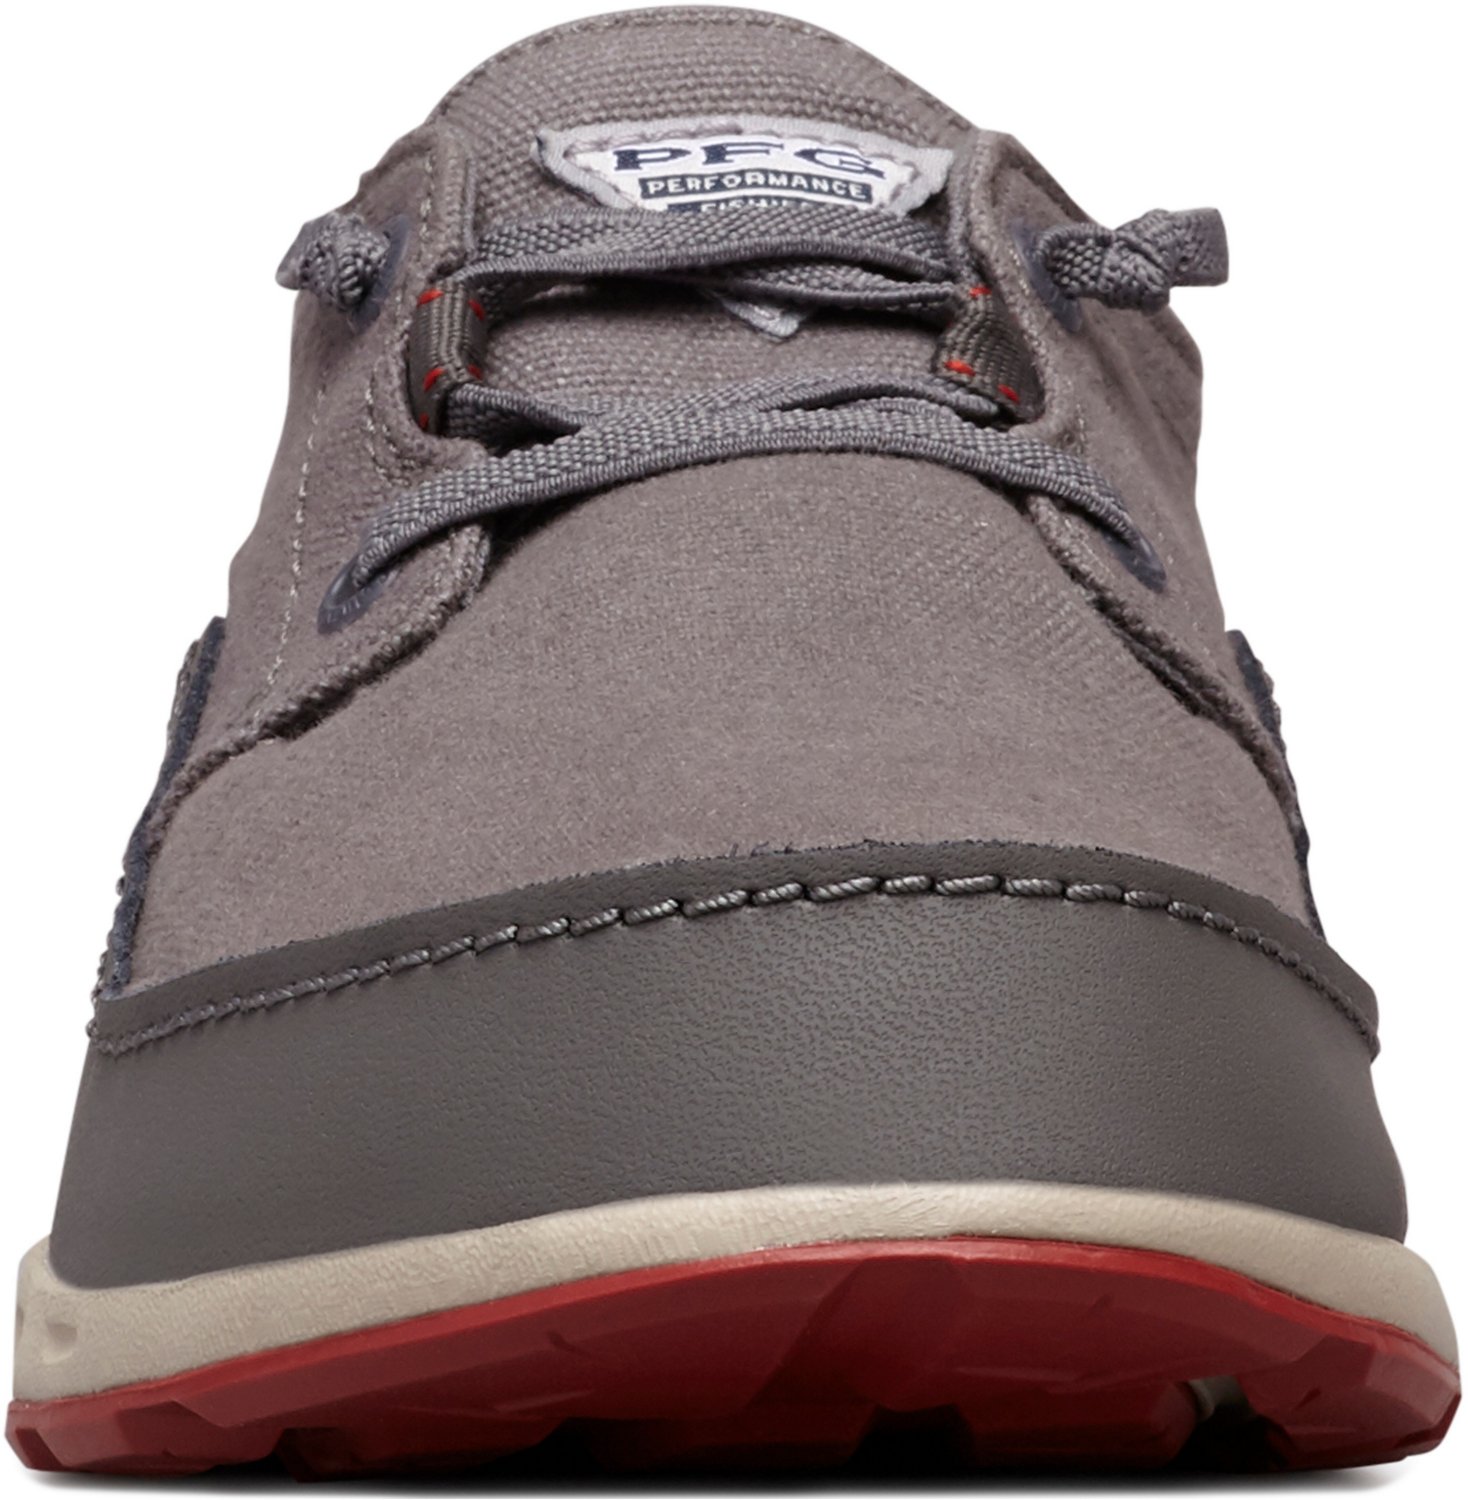 Columbia Men's PFG Bahama Vent Relaxed Lace Up Fishing Boat Shoes